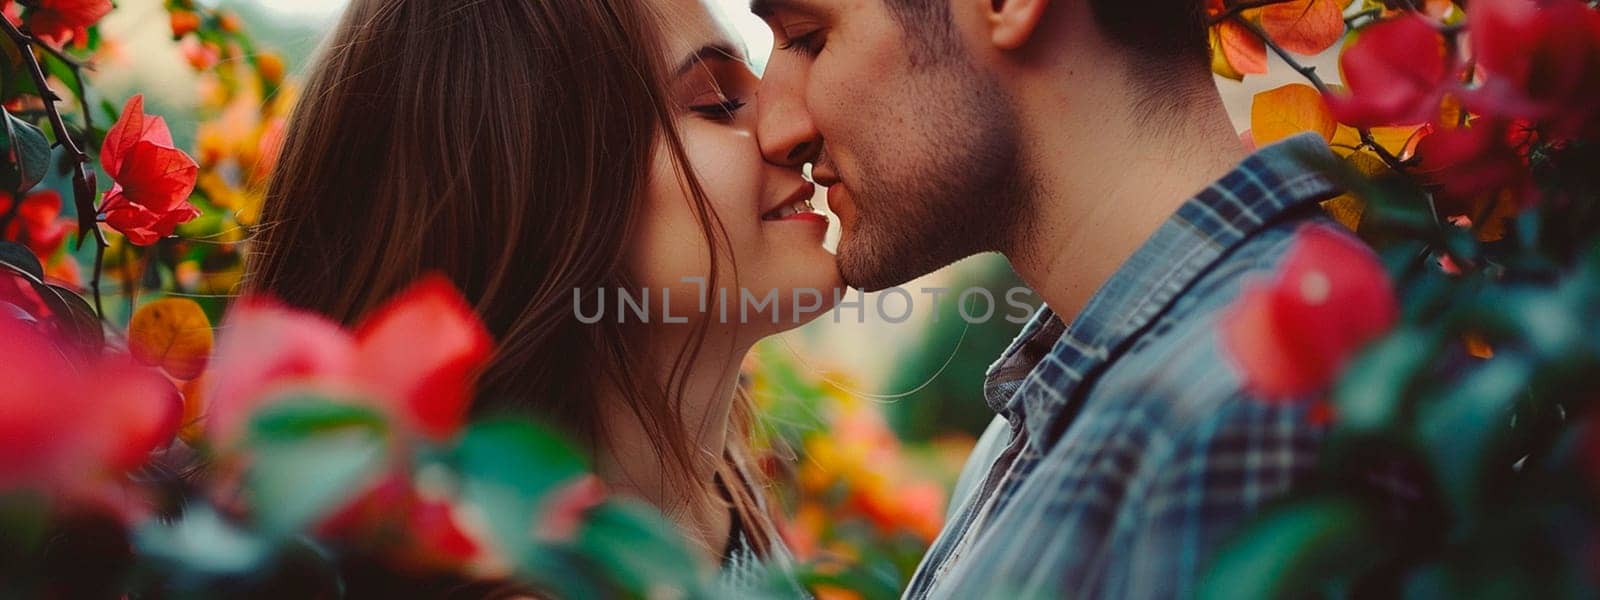 lovers kiss in a blooming garden. Selective focus. people.